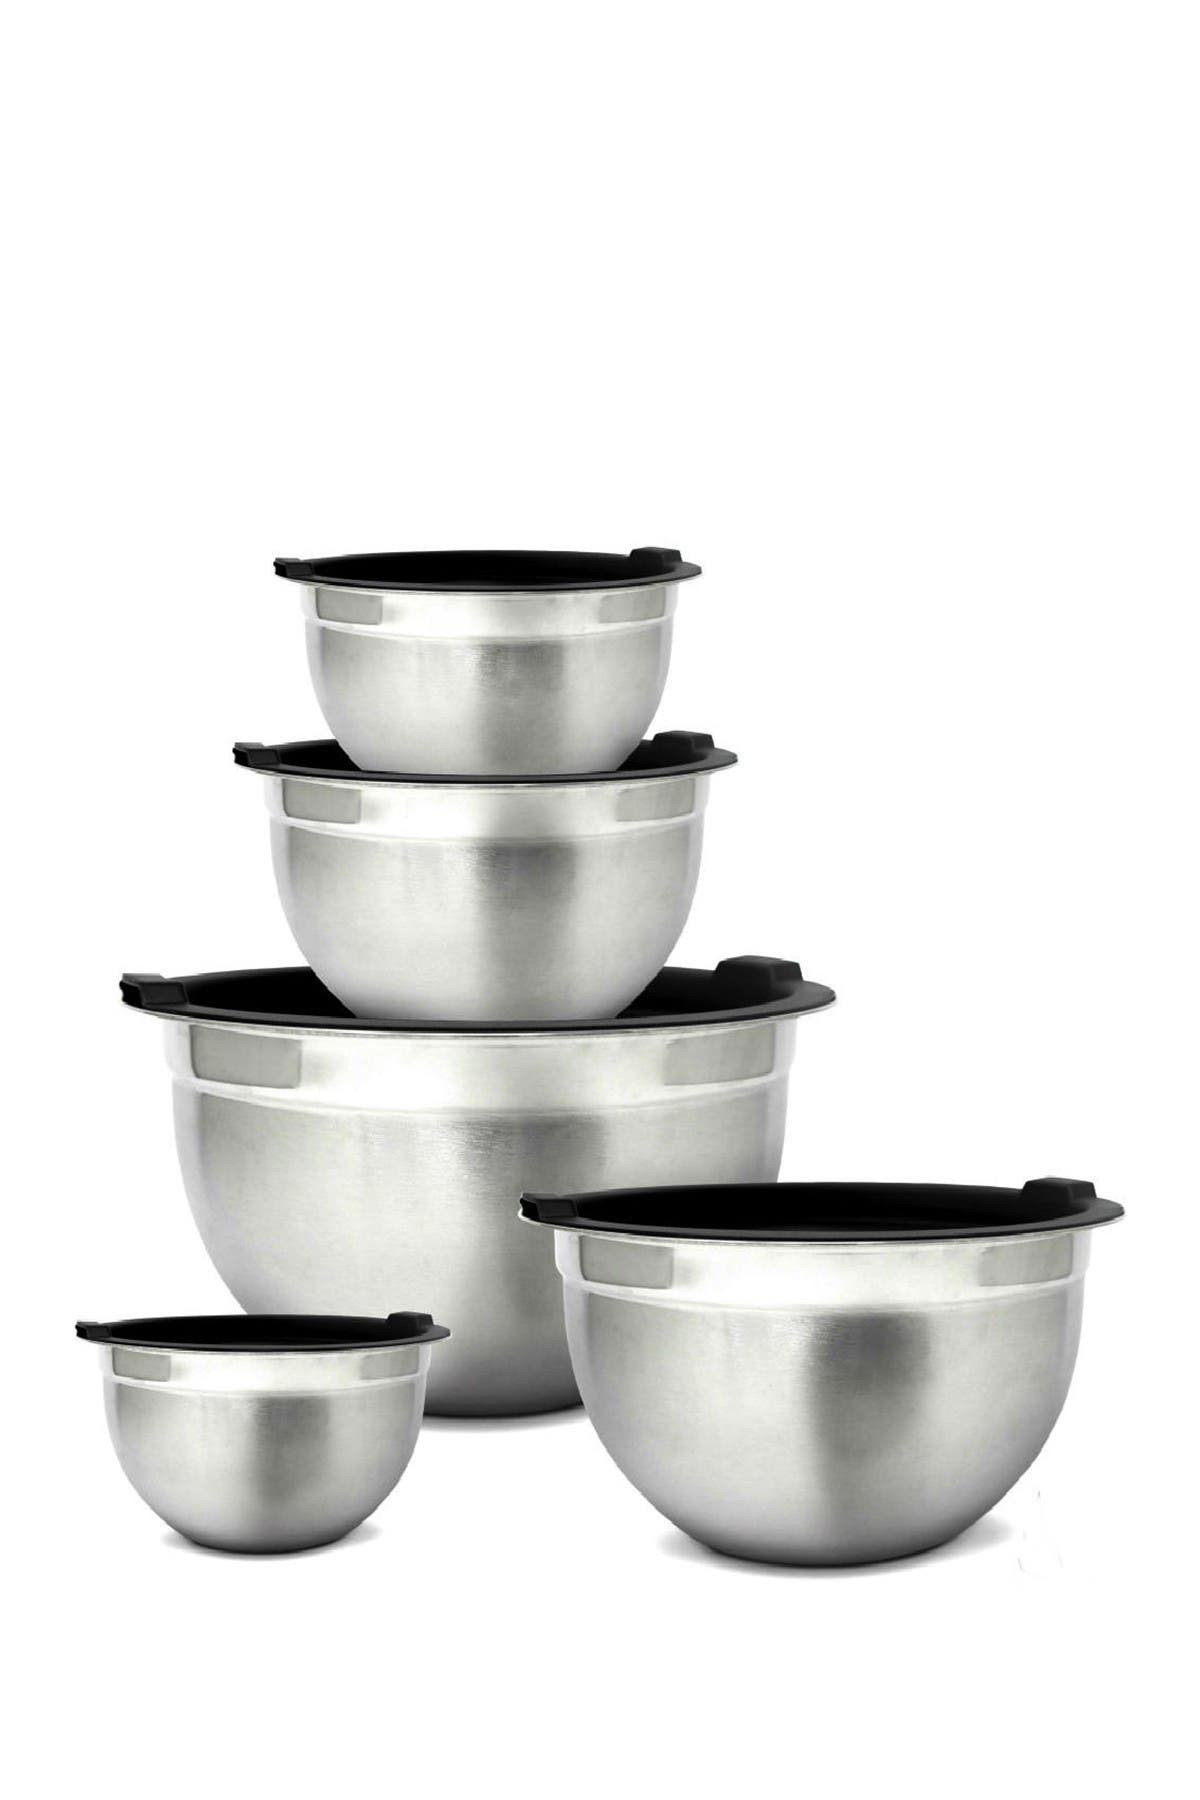 Mixing Bowl – Homikit Stainless Steel Salad Bowls with Airtight Lids Set of 5